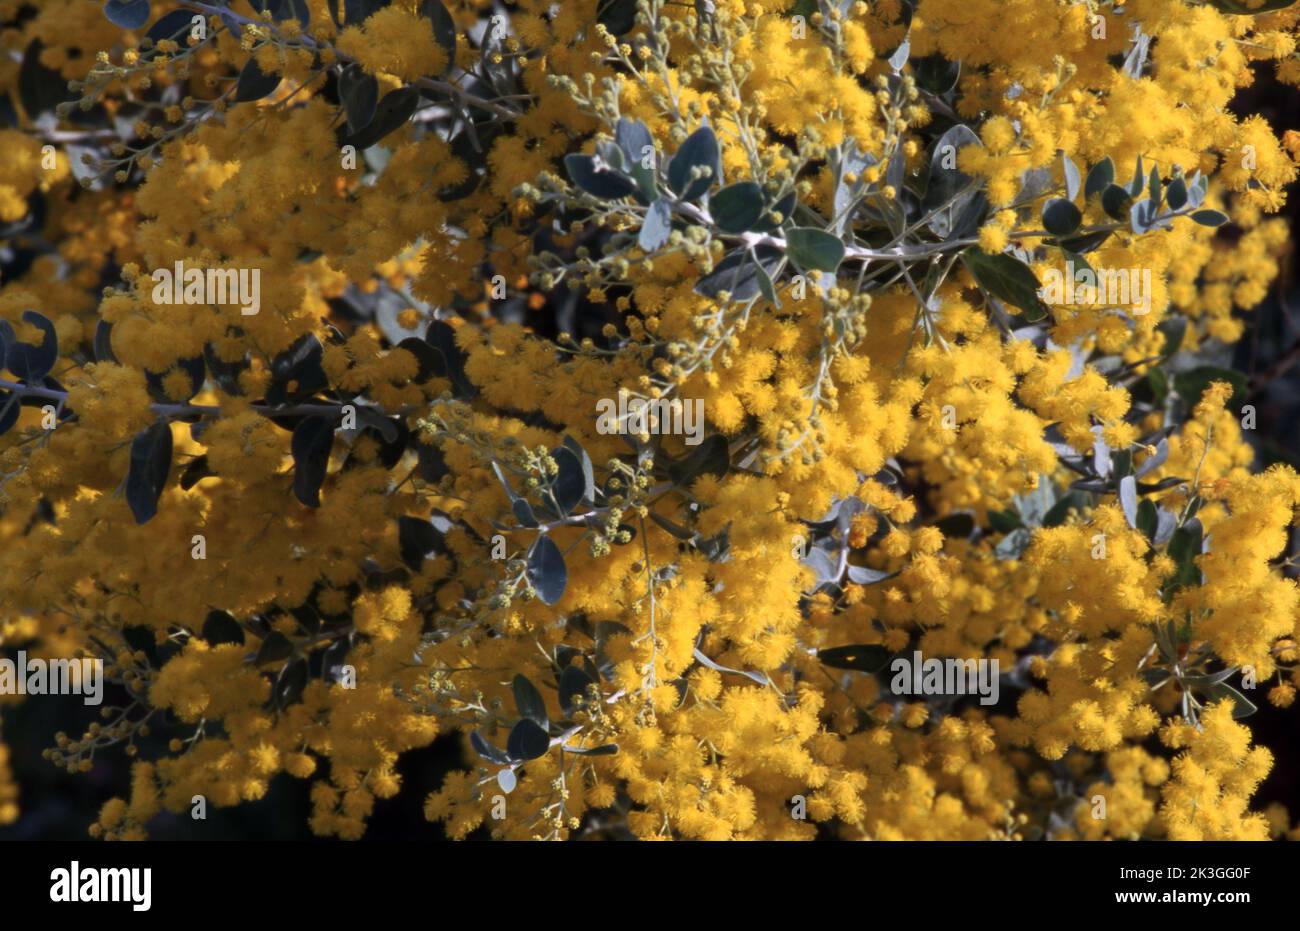 CLOSE-UP OF THE LEAVES AND FLOWERS ON AN ACACIA TREE (ALSO KNOWN AS WATTLE). Stock Photo